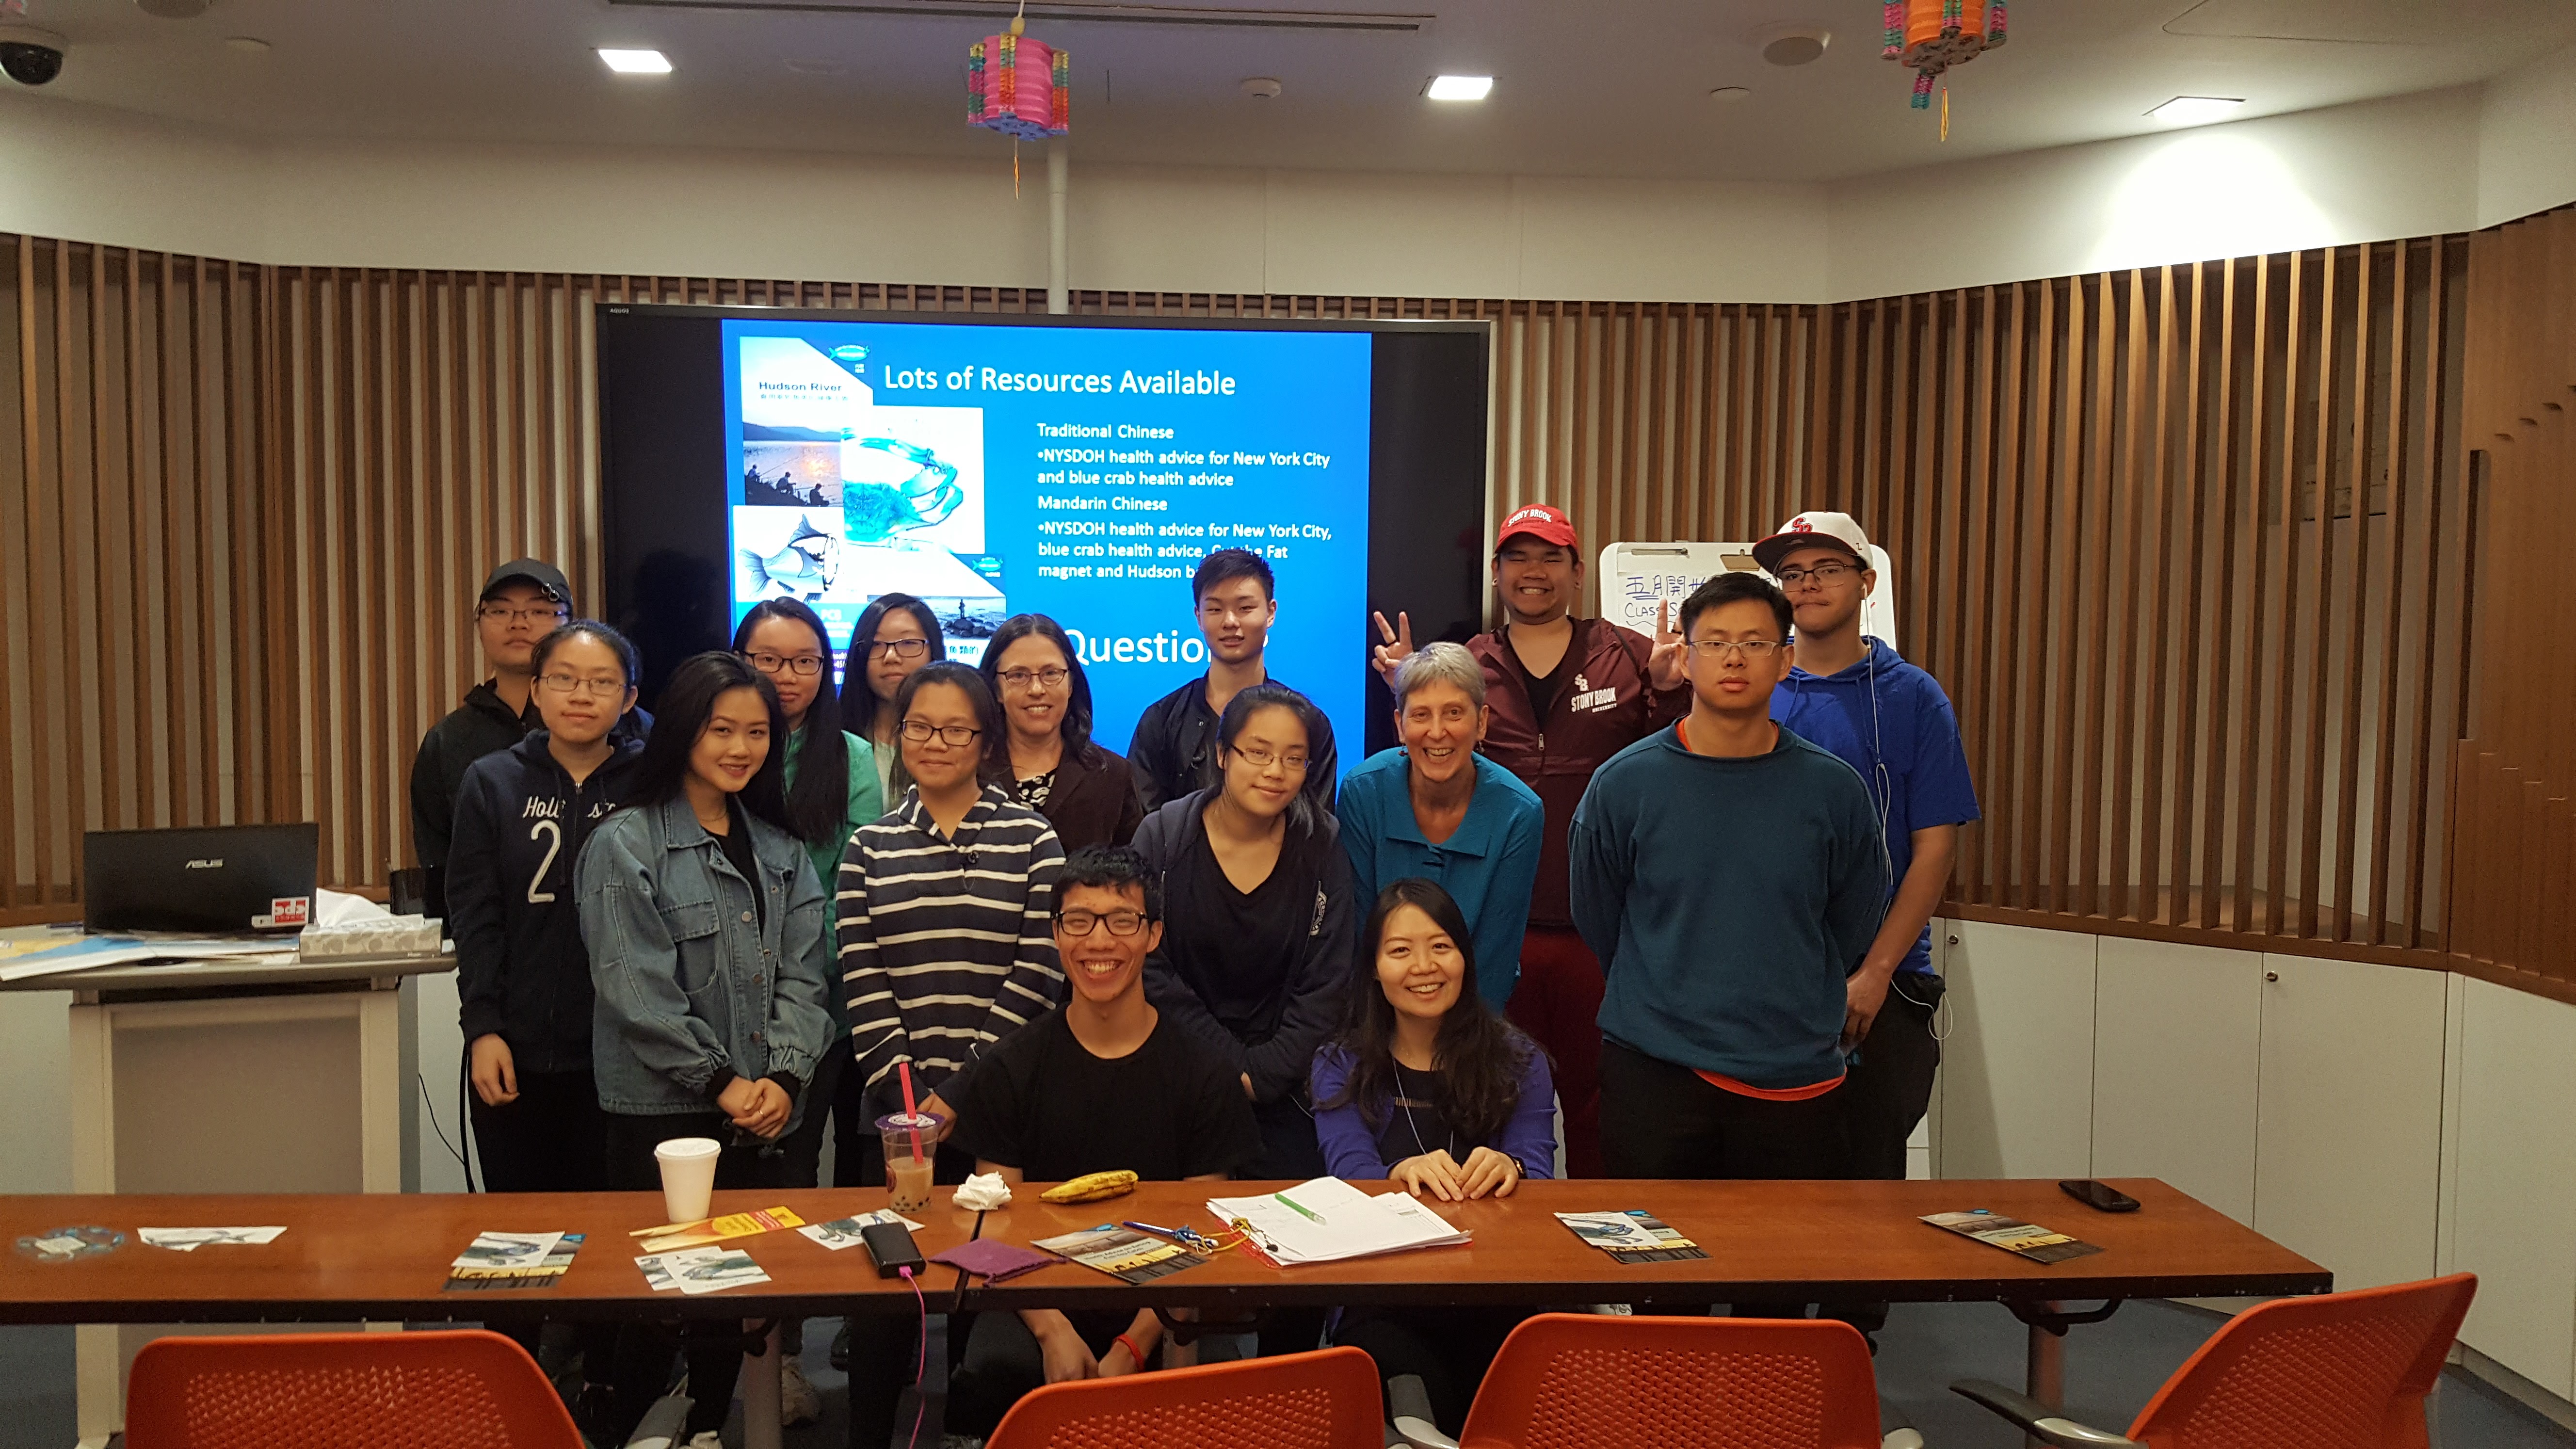 Wendy McKelvey of NYCDOHMH (7th from the left) and Regina Keenan of NYSDOH (4th from the right) with CPC youth after conducting a workshop on fish advisory